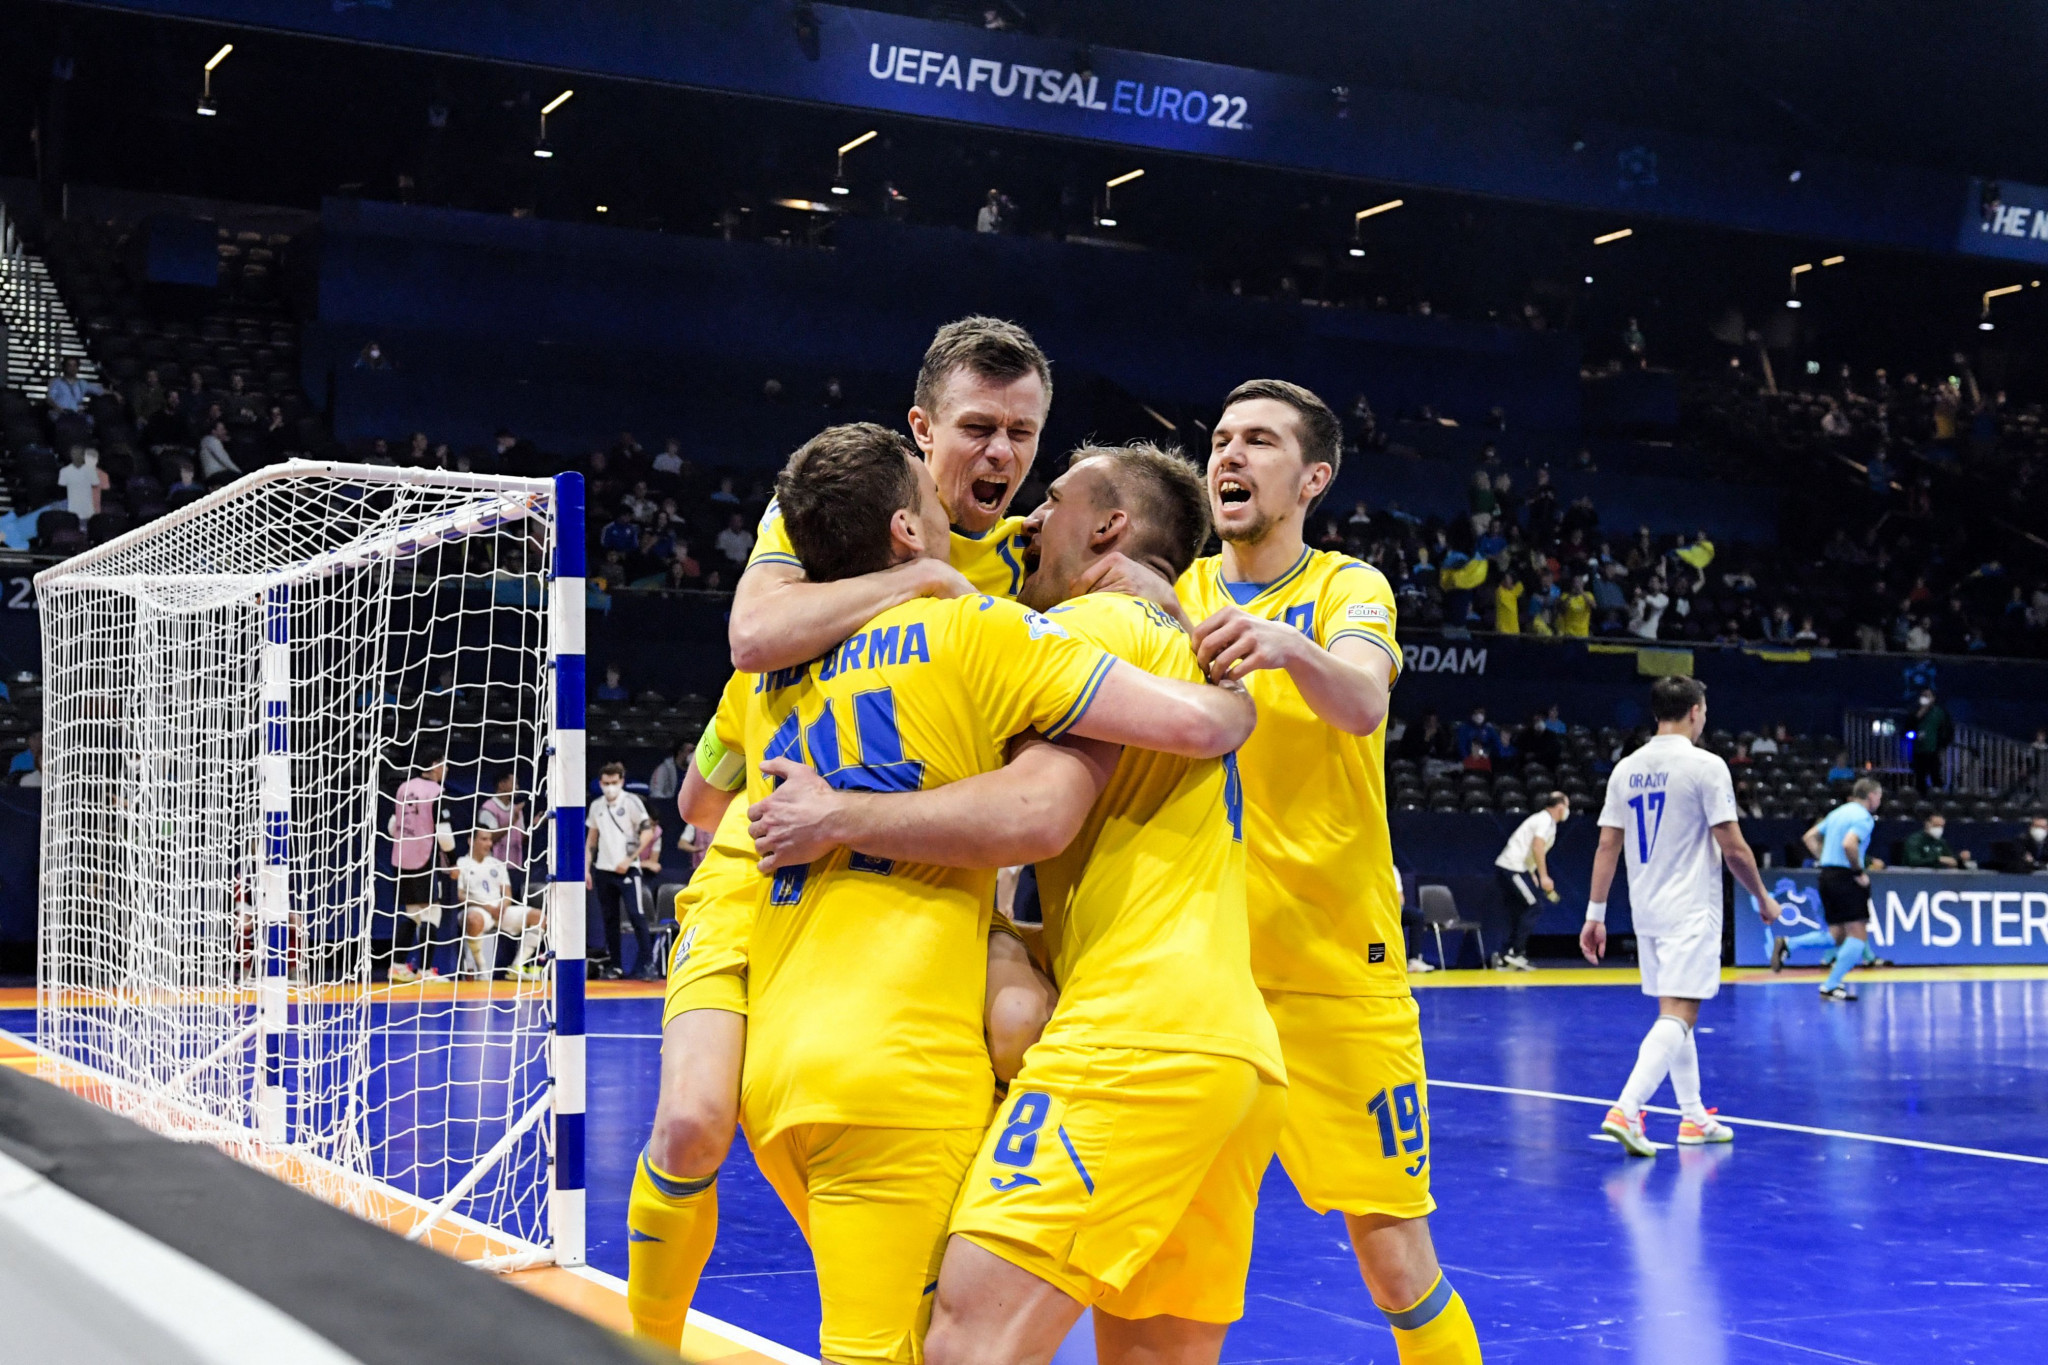 Ukraine reached the UEFA Futsal Euro semi-finals for the first time since 2005 ©Getty Images